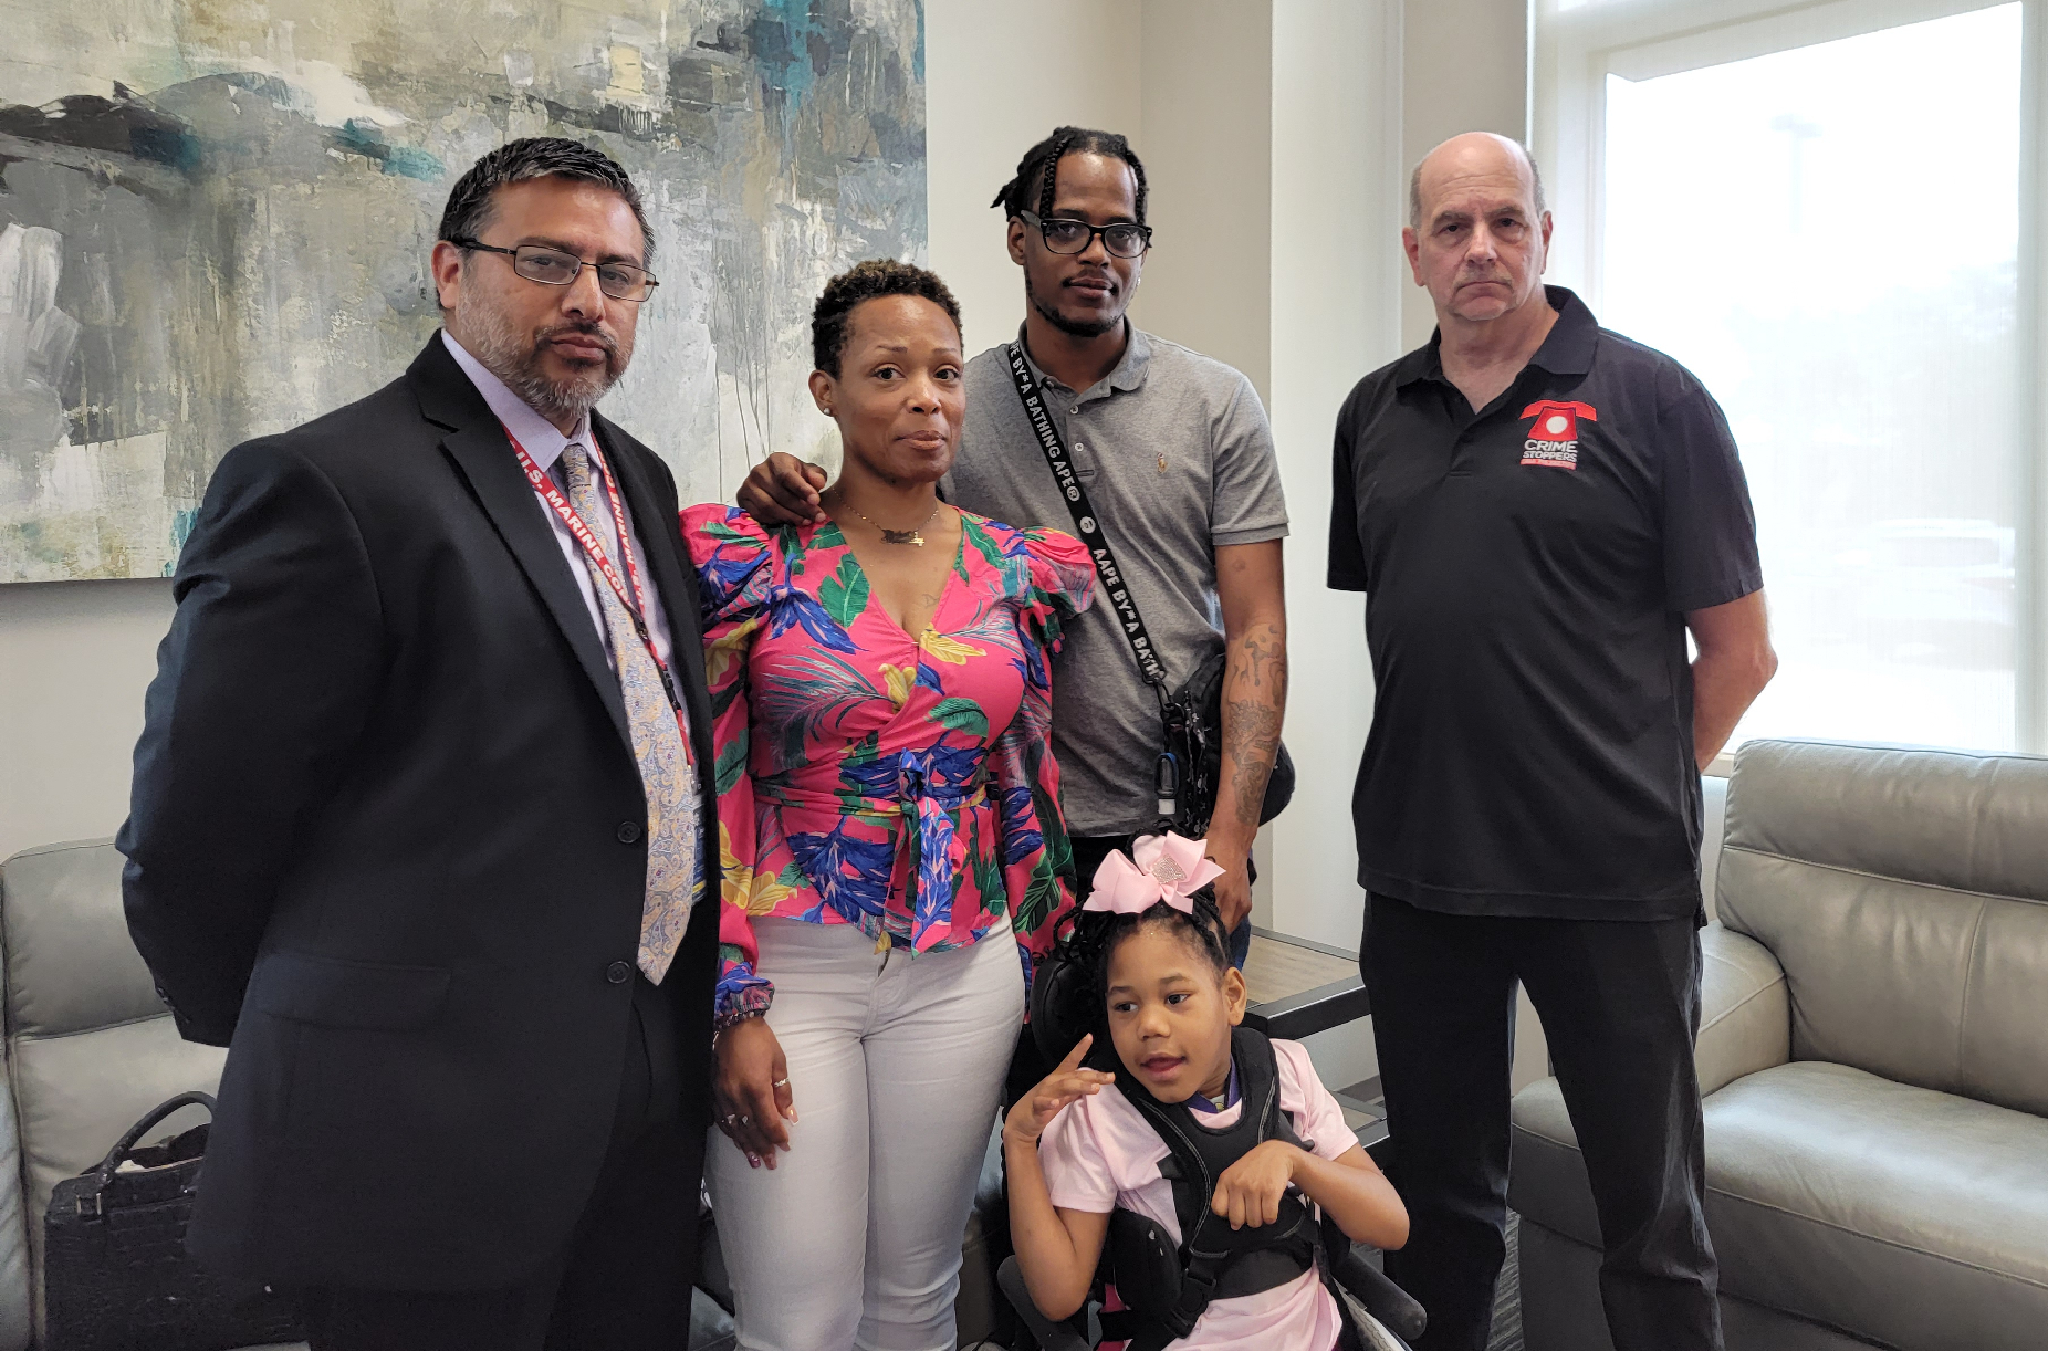 Disha Allens family with CrimeStoppers Houston Andy Kahan and HPD detective